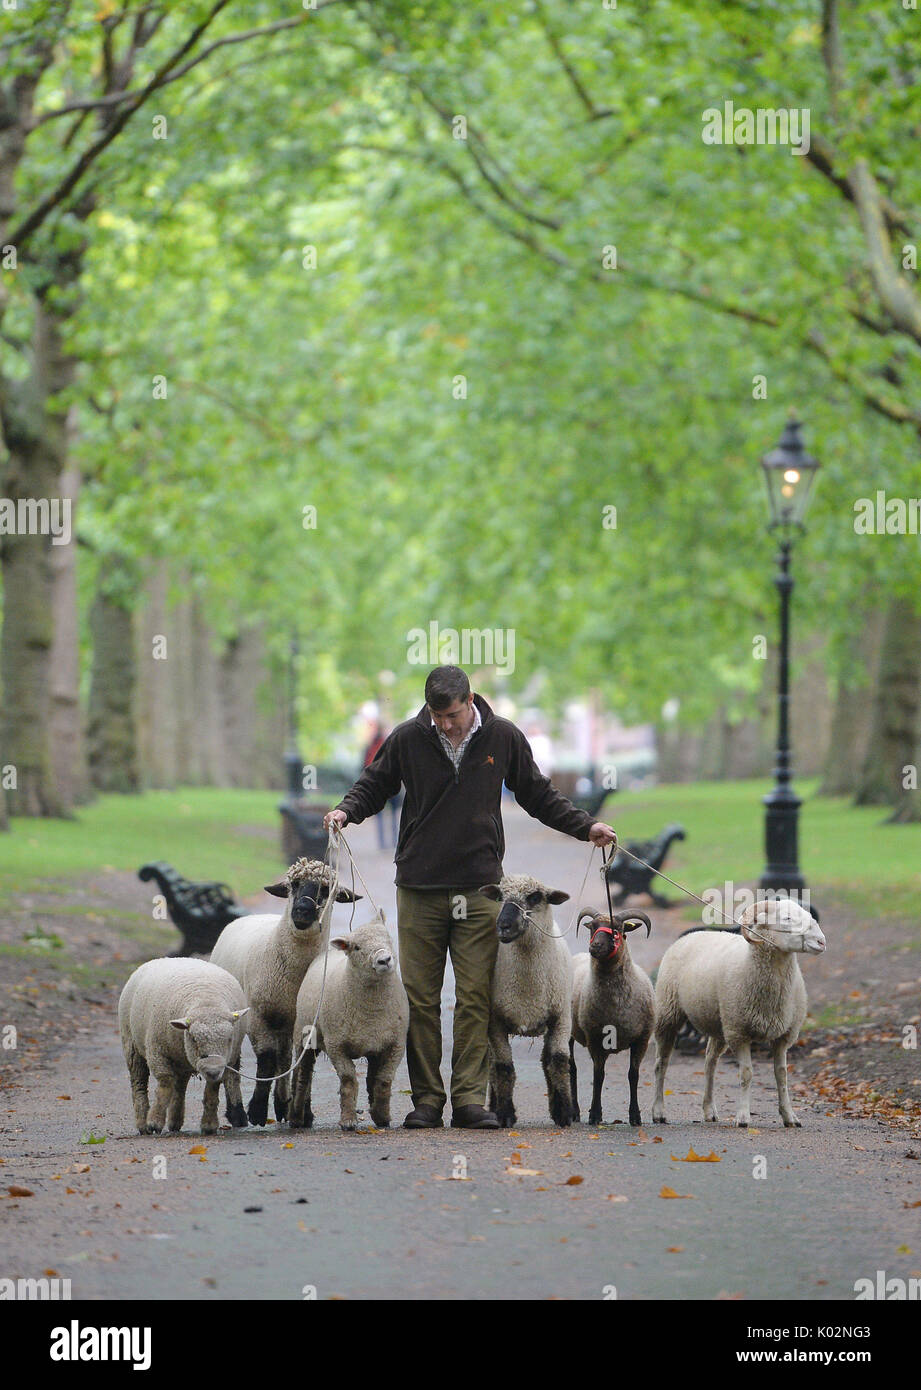 Tom Davis, manager of Mudchute farm, with sheep in Green Park, London, which are there for a conservation trial that sees The Royal Parks Mission: Invertebrate team up with the Rare Breeds Survival Trust and Mudchute Farm. Stock Photo